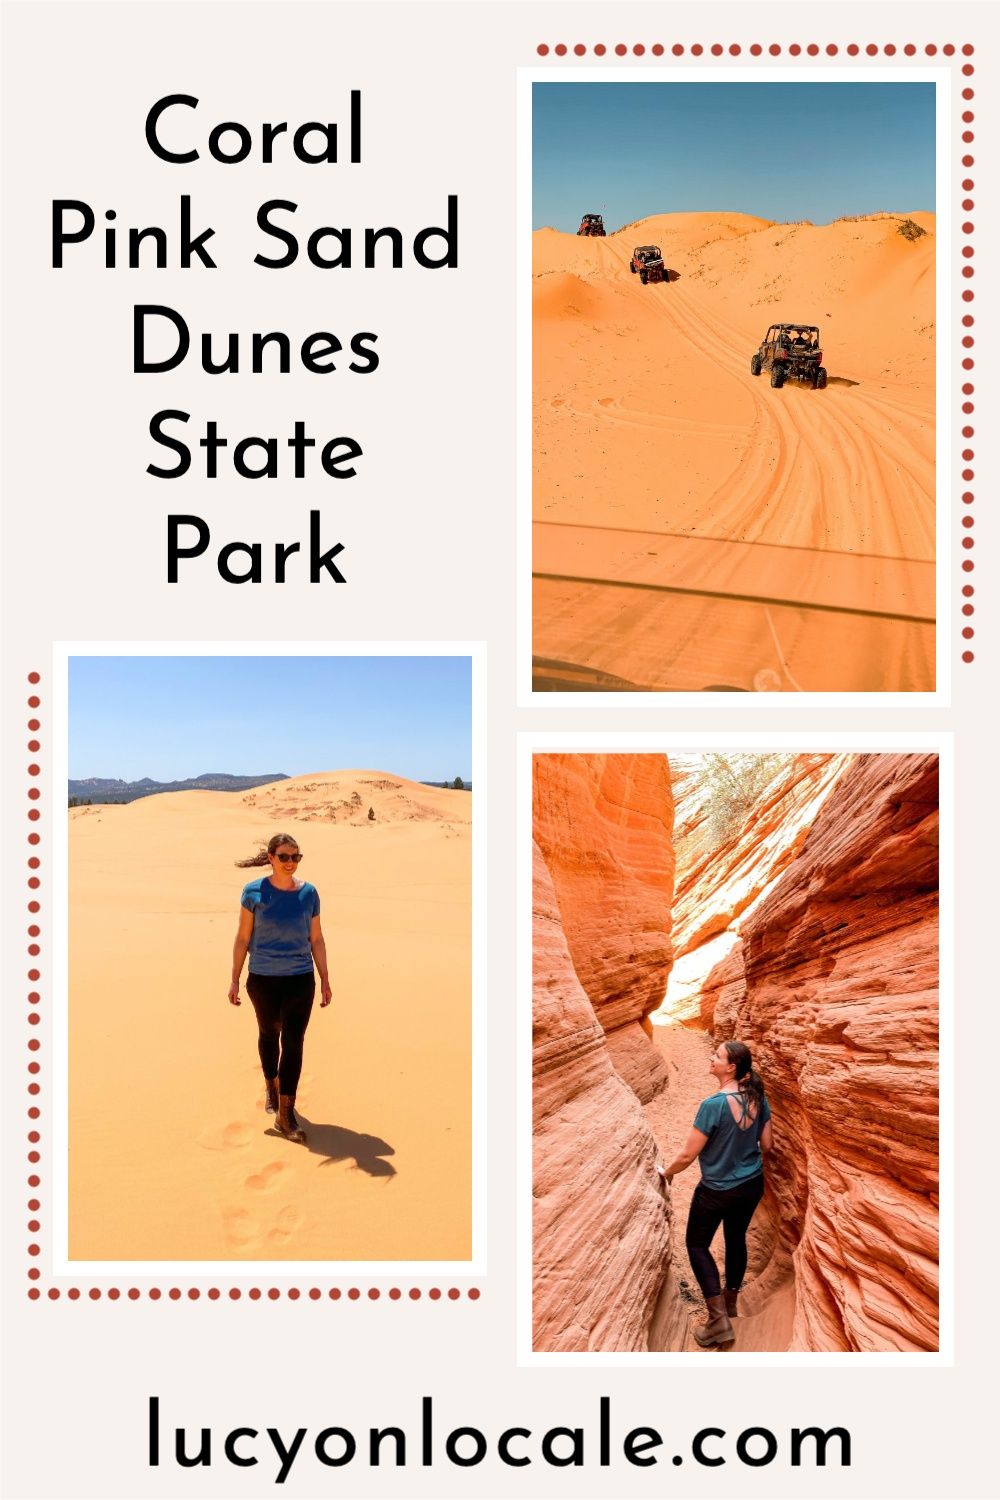 Coral Pink Sand Dunes State Park photos